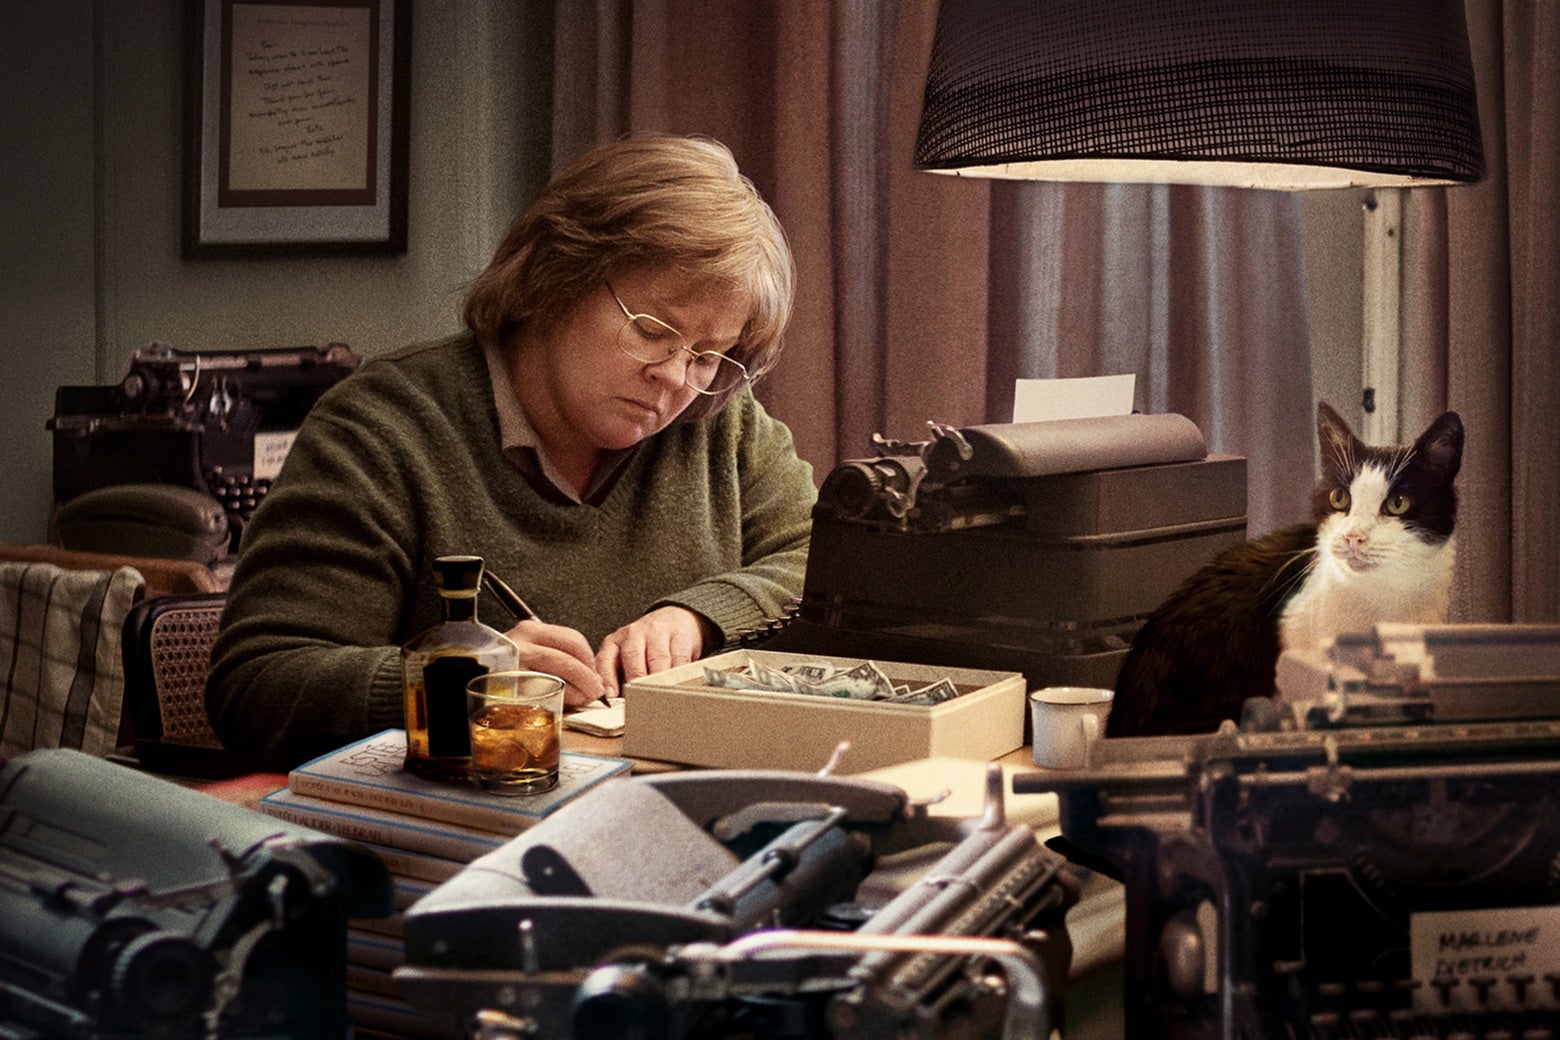 In a scene from Can You Ever Forgive Me? Lee Israel, played by Melissa McCarthy, sits at a desk forging a letter. There are several typewriters, a lamp, and a cat on the desk.